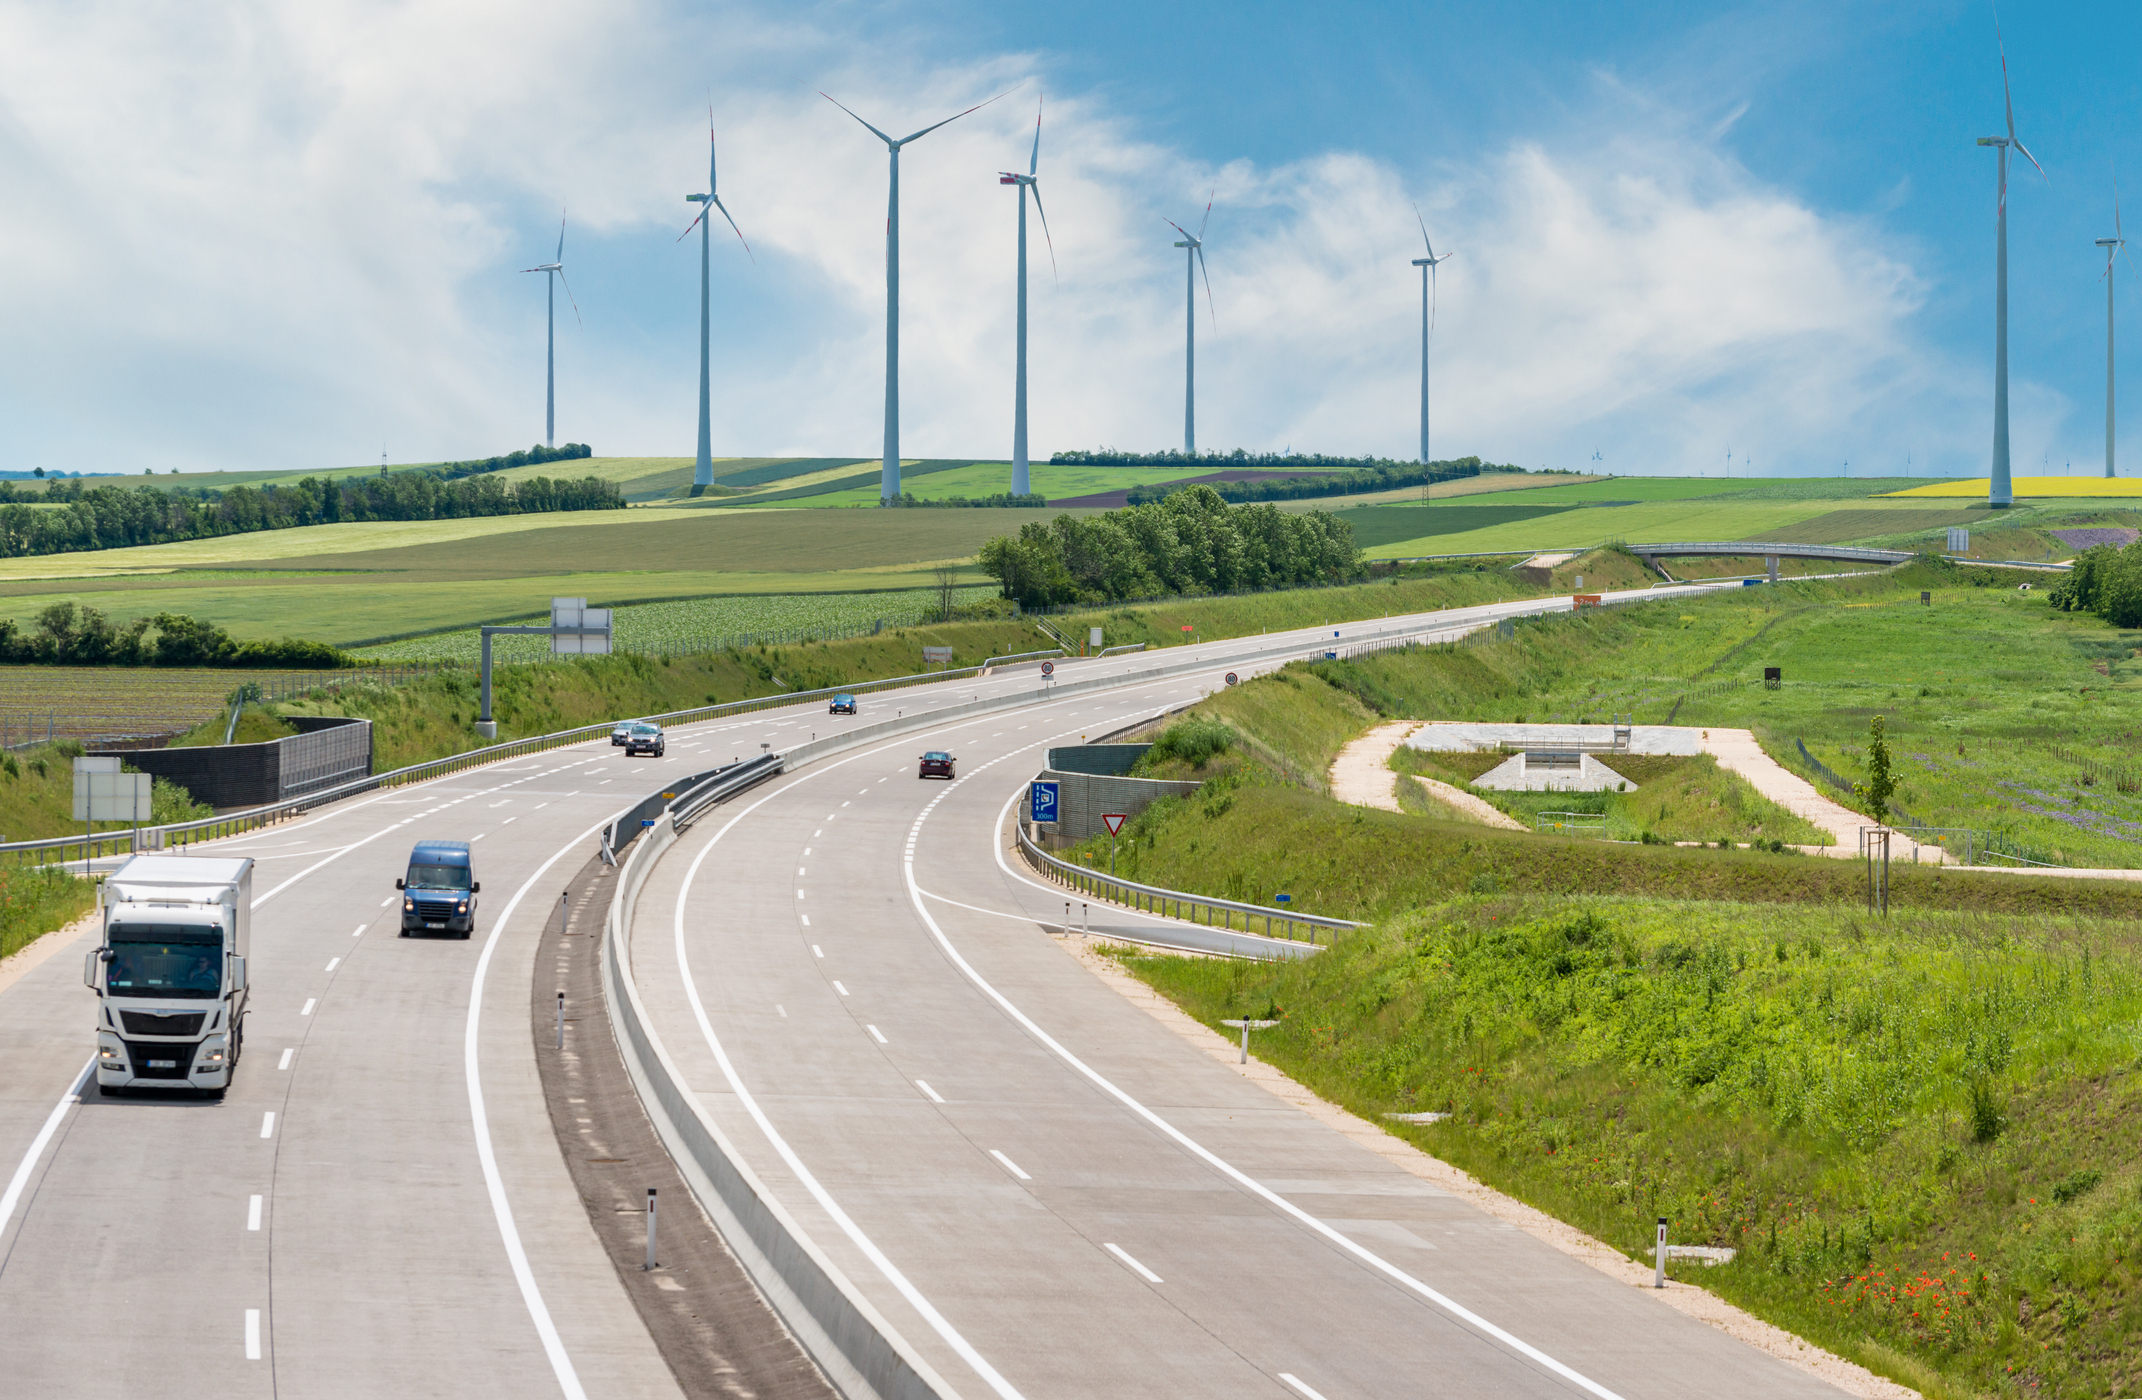 Cars on highway in front of green fields with air turbines.